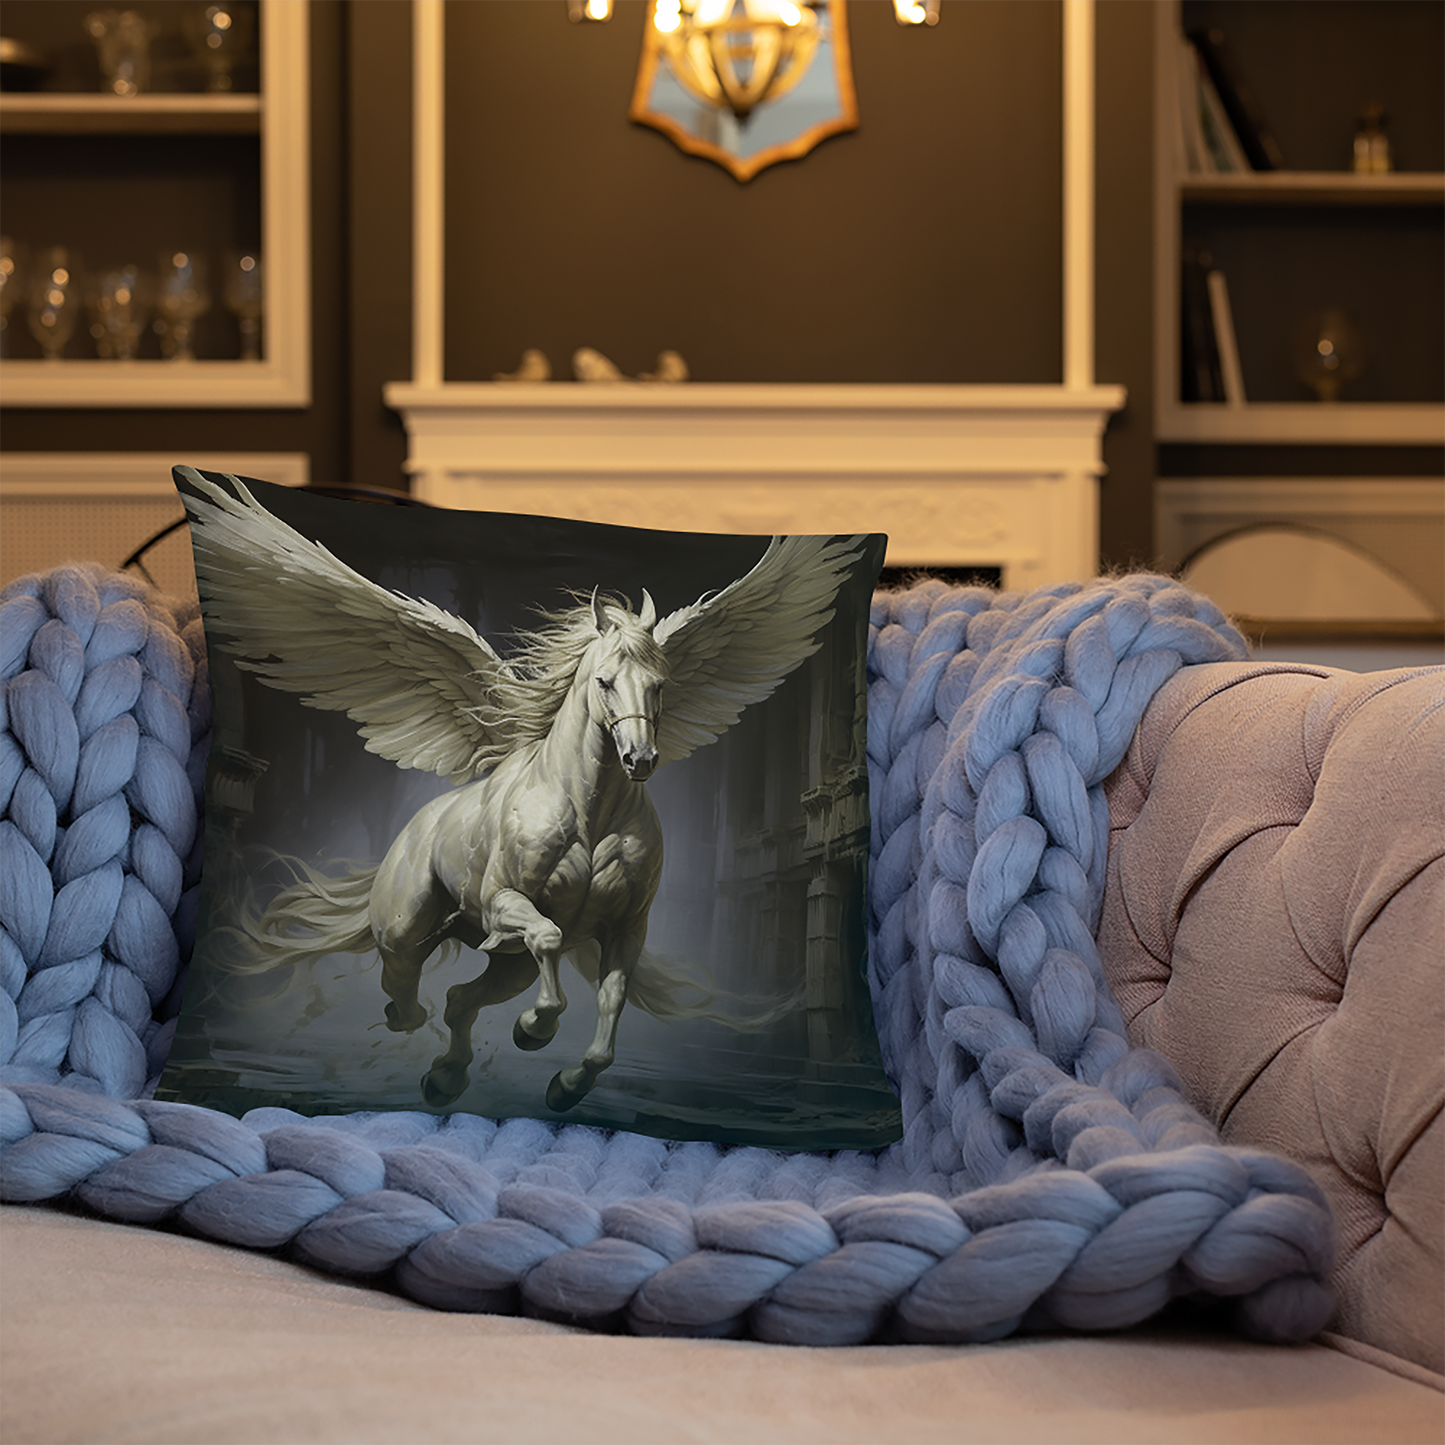 Horse Throw Pillow Mystical Winged Horse Realism Polyester Decorative Cushion 18x18